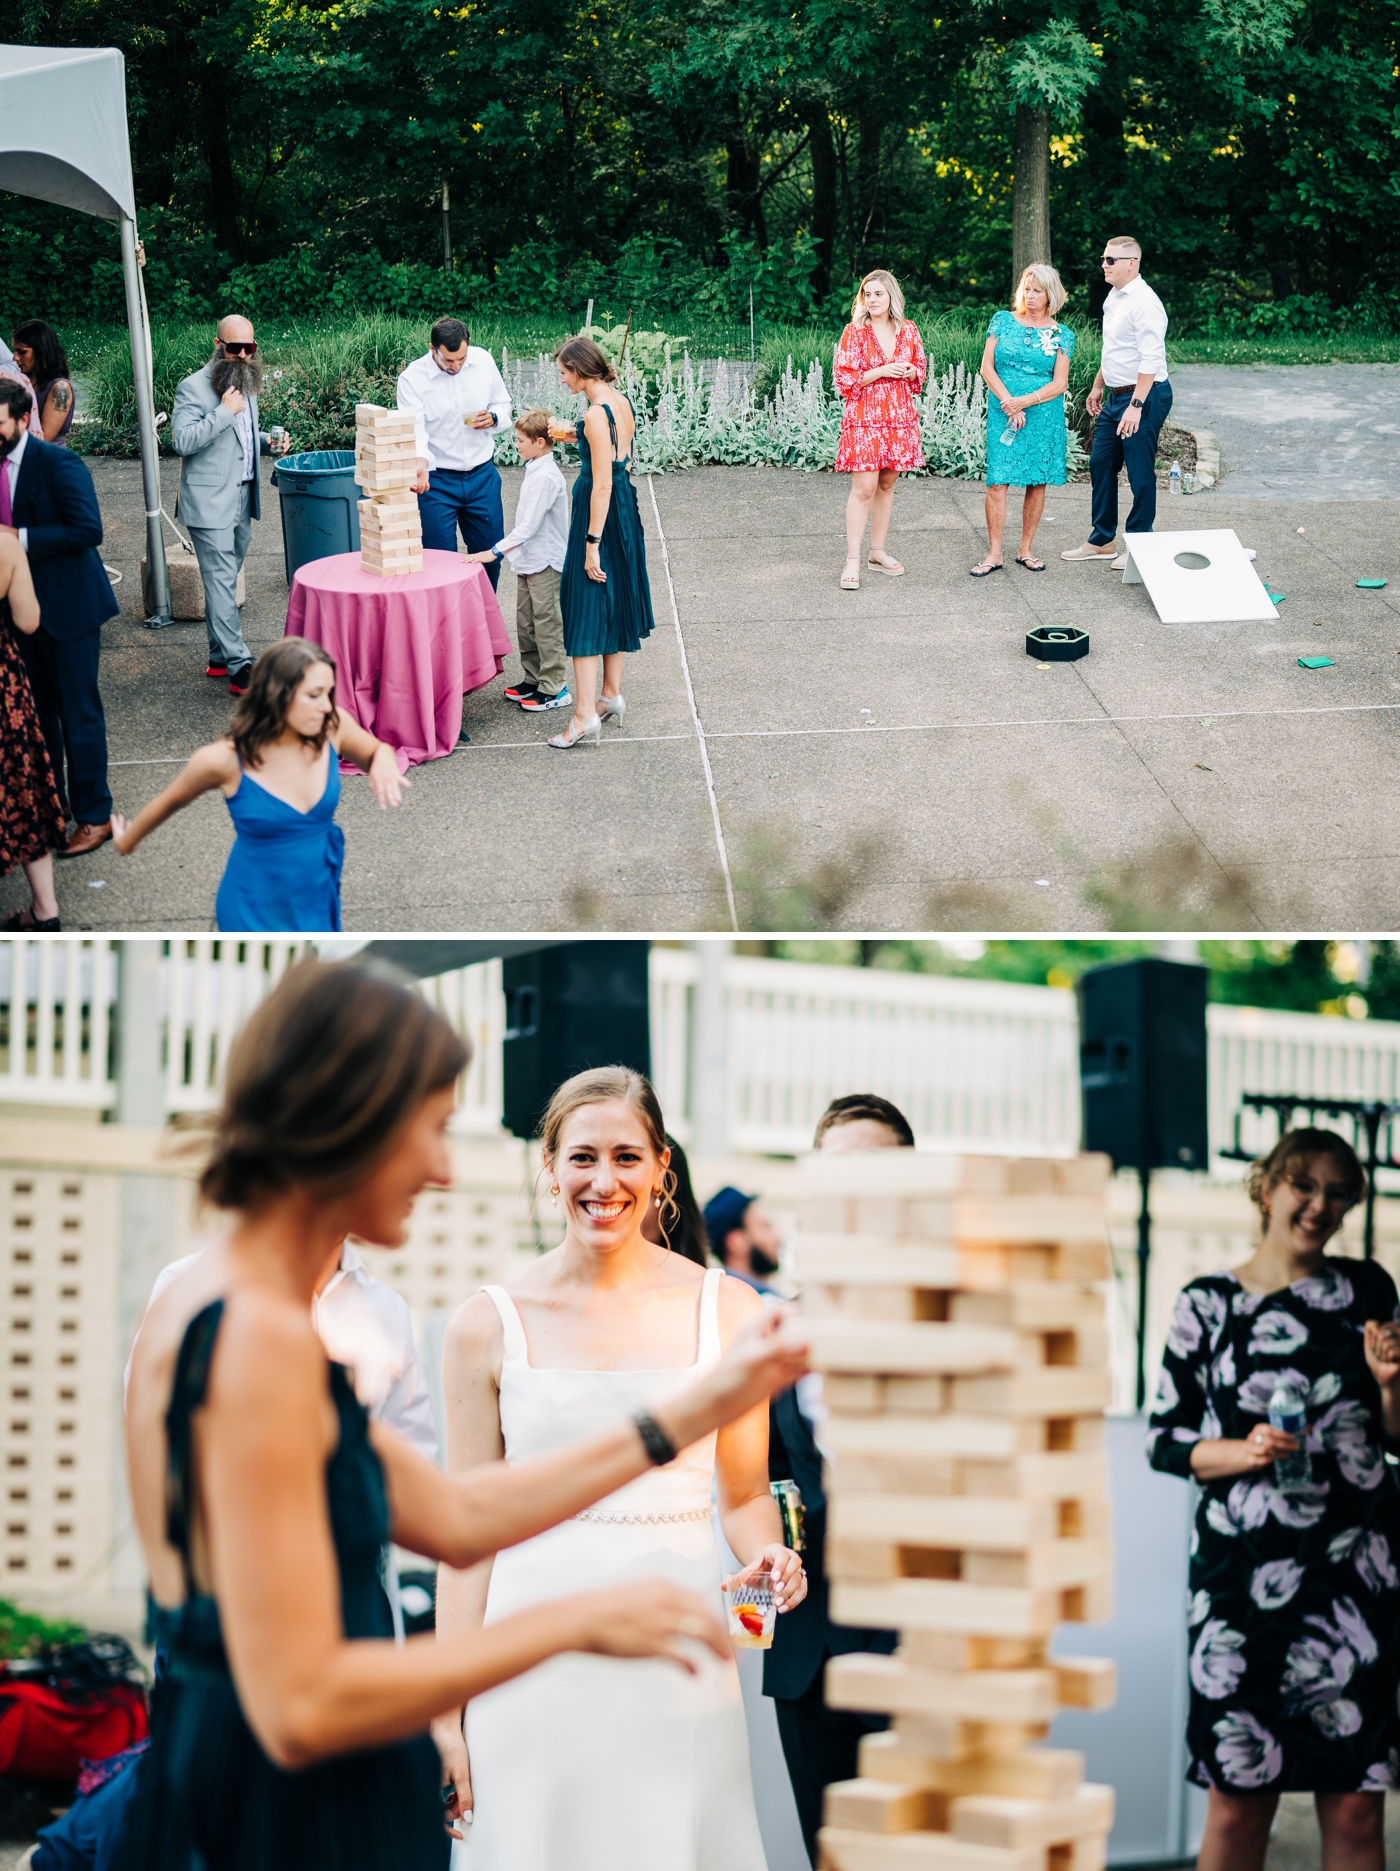 Bride and wedding guests playing lawn games during wedding reception at the Chapel Shelter